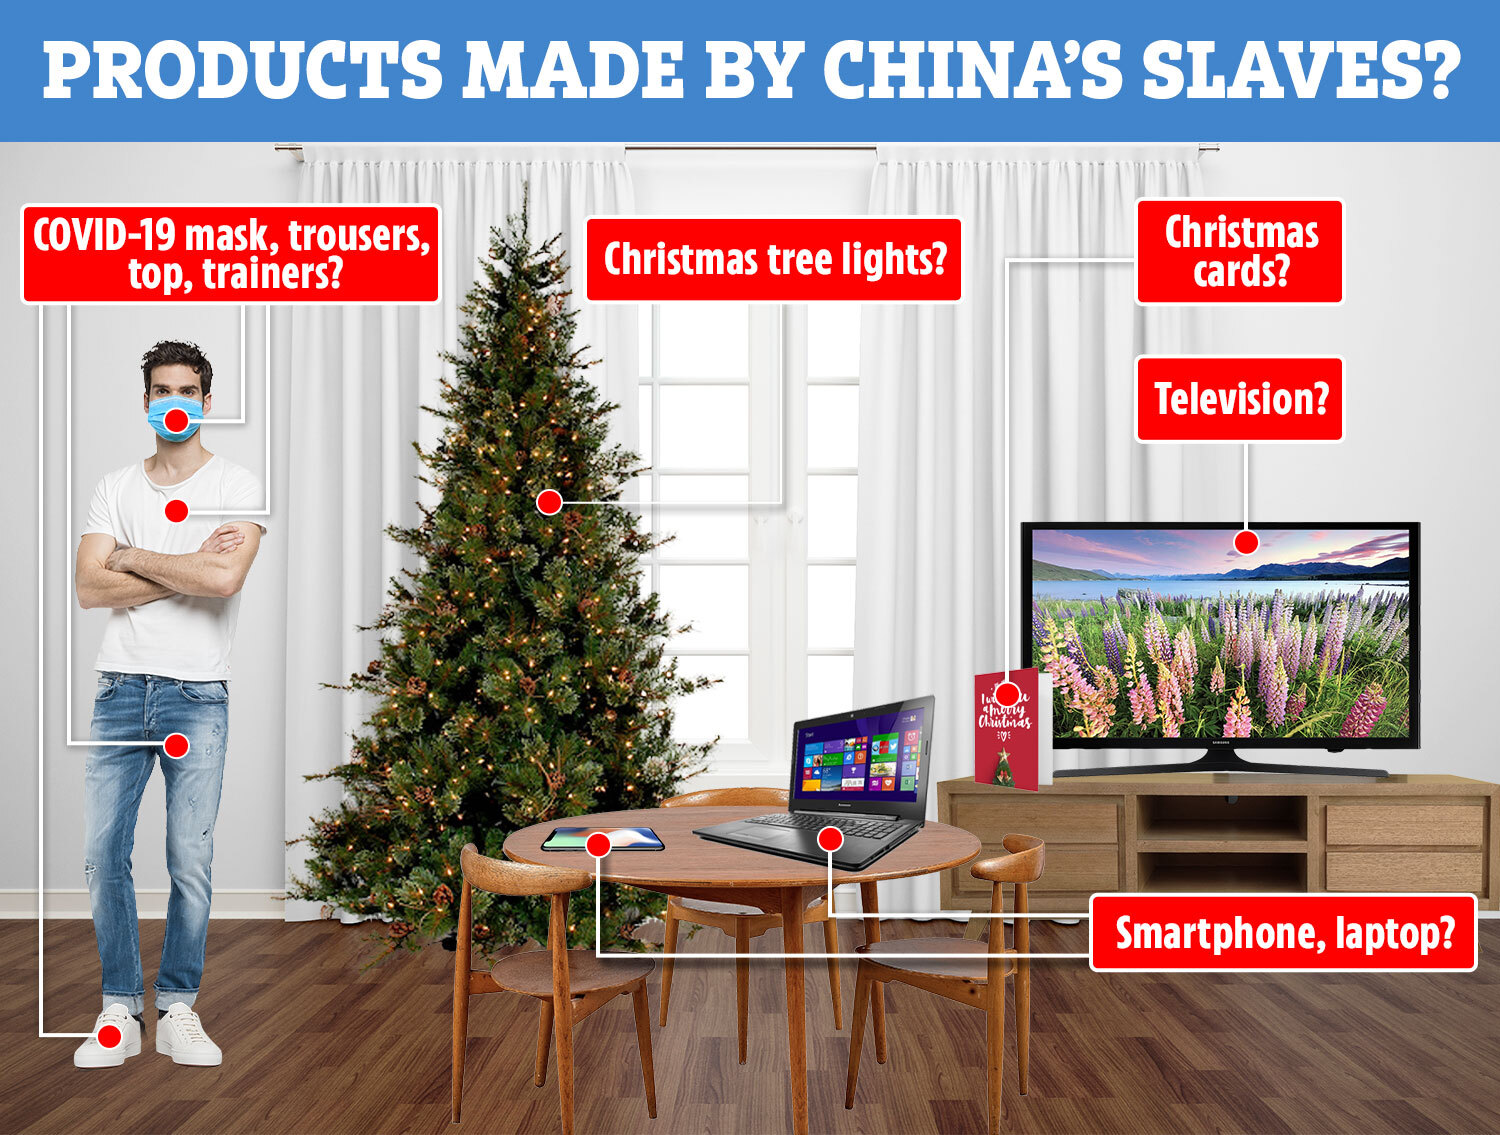 The products which human rights and anti-slavery campaigners claim are made in part or fully in China's forced labour camps